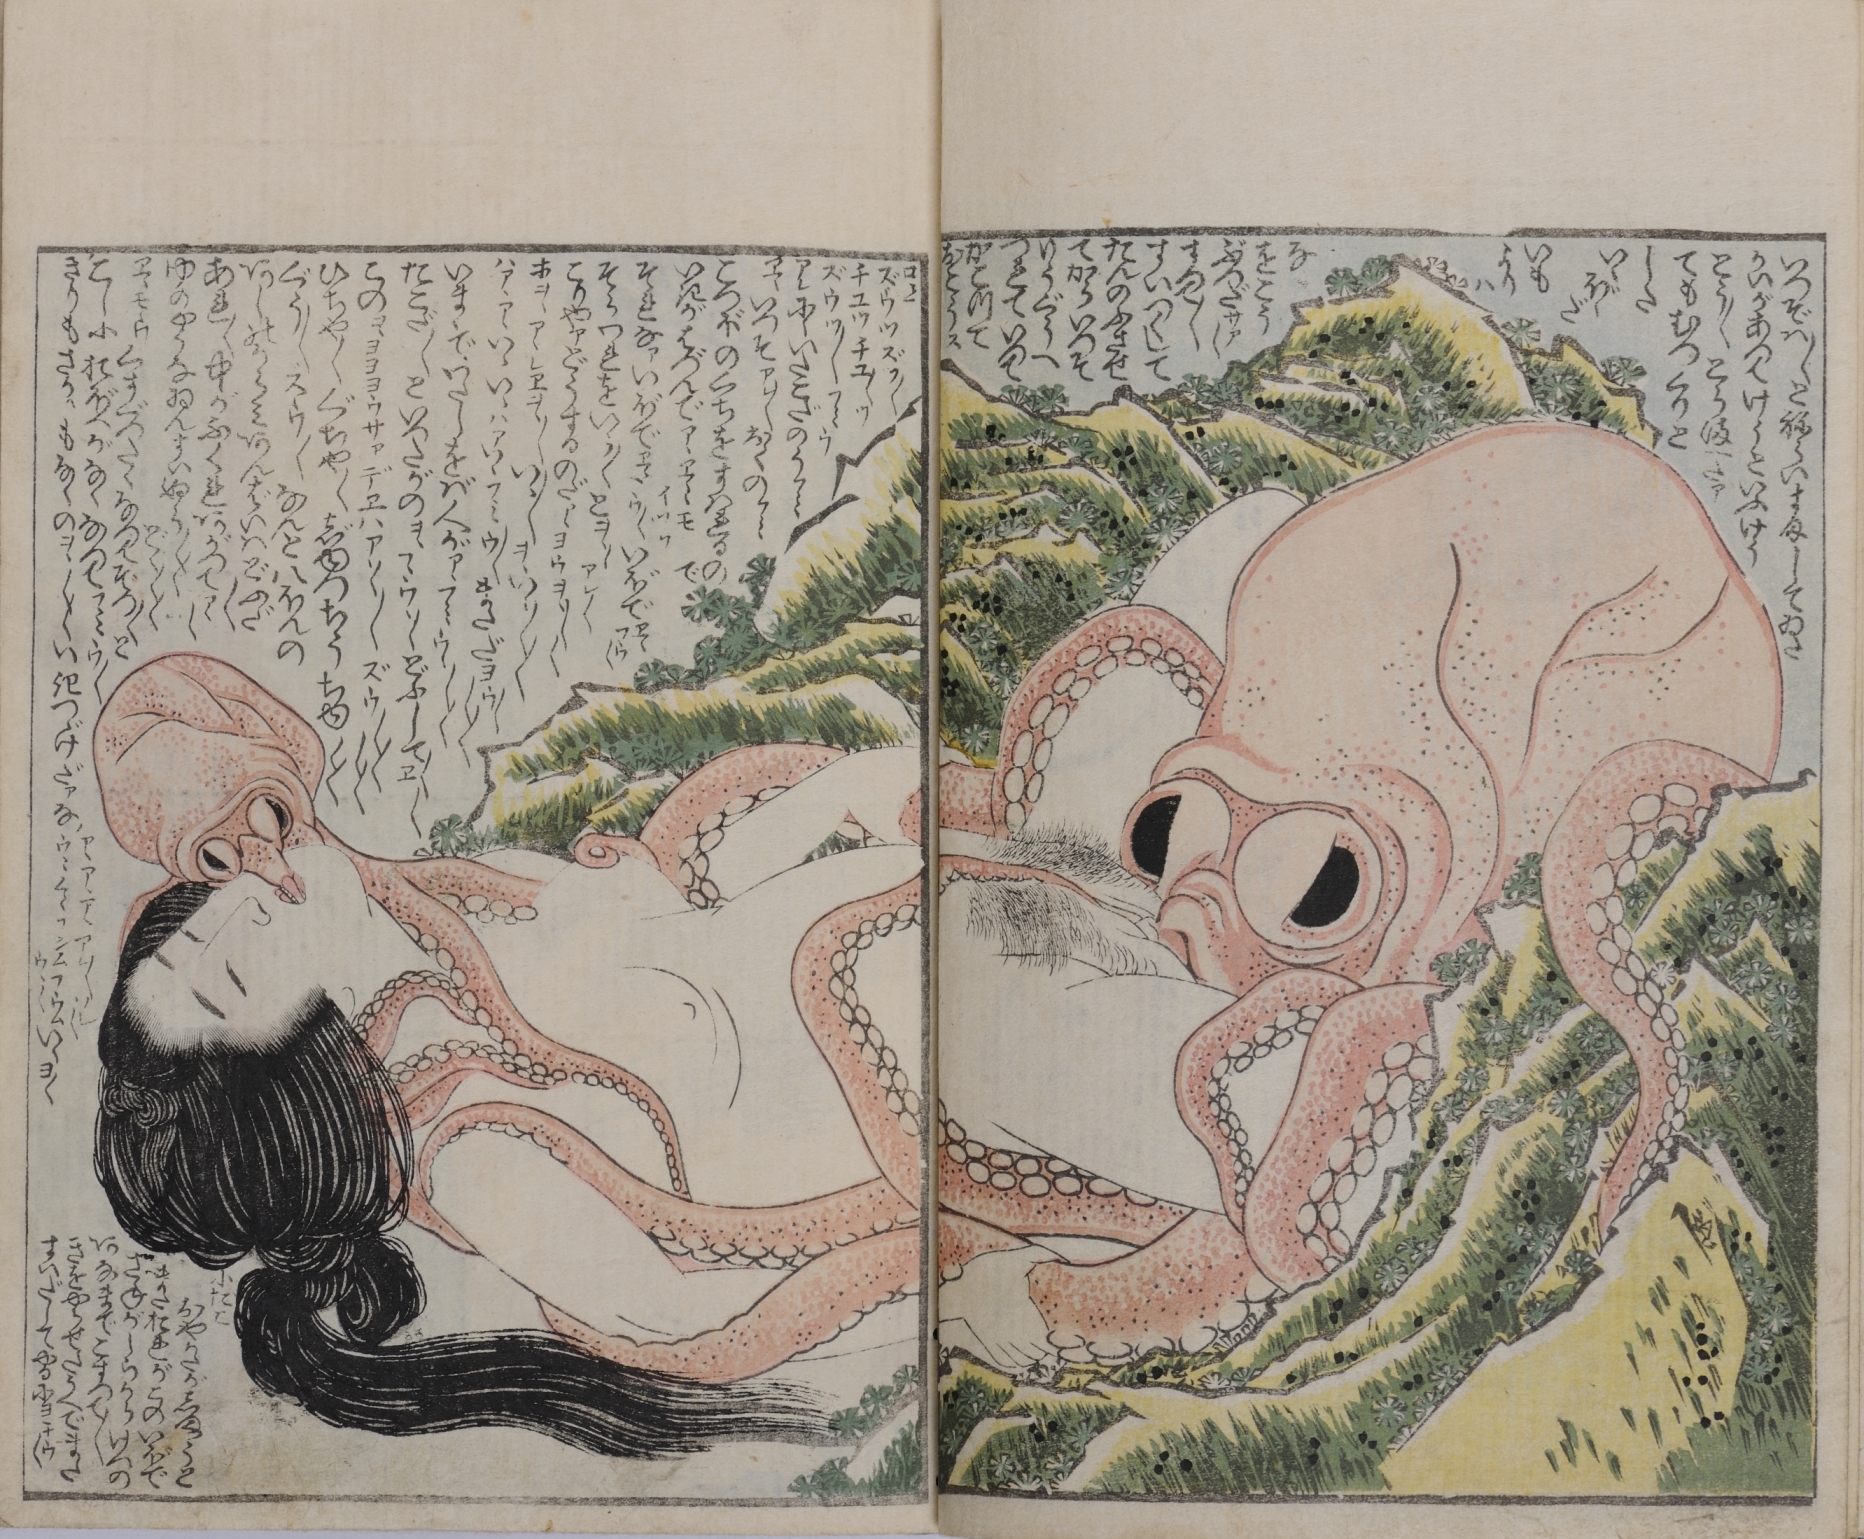 17th Century Japanese Sex - Shunga history and exhibition | Time Out Tokyo